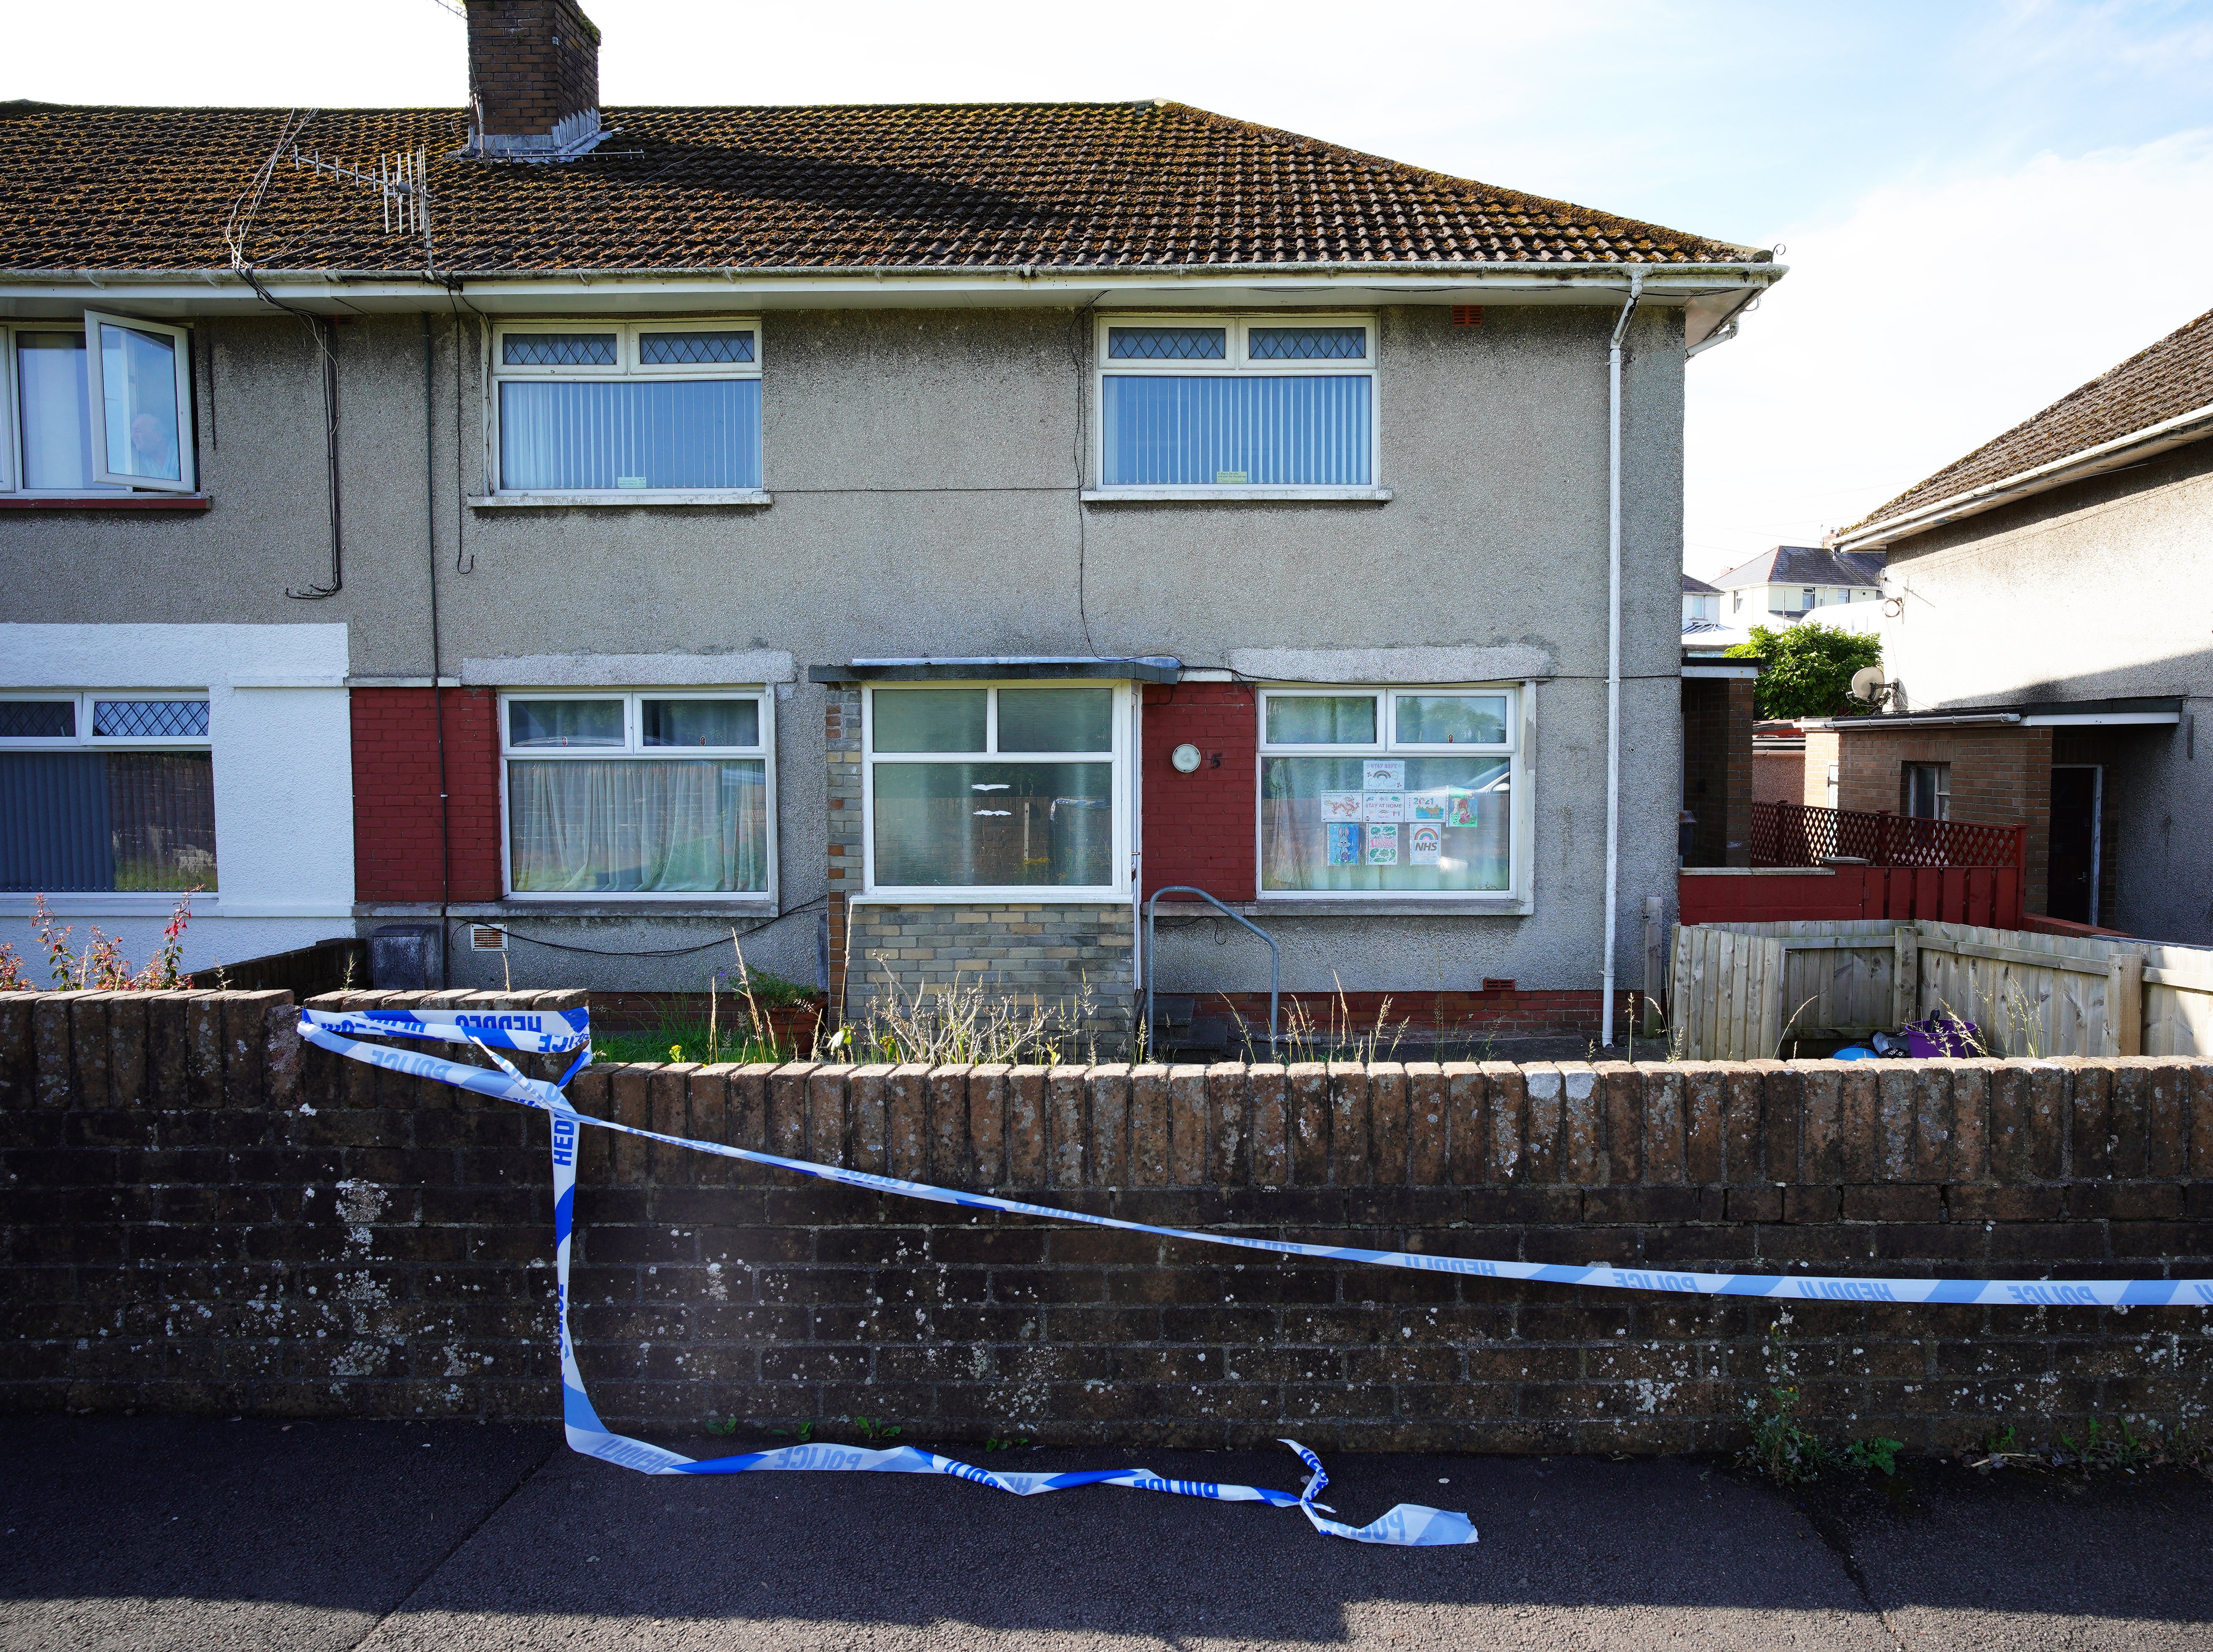 Police tape at a property in the Sarn area of Bridgend, near where five-year-old Logan Mwangi was found dead in the River Ogmore (Ben Birchall/PA)